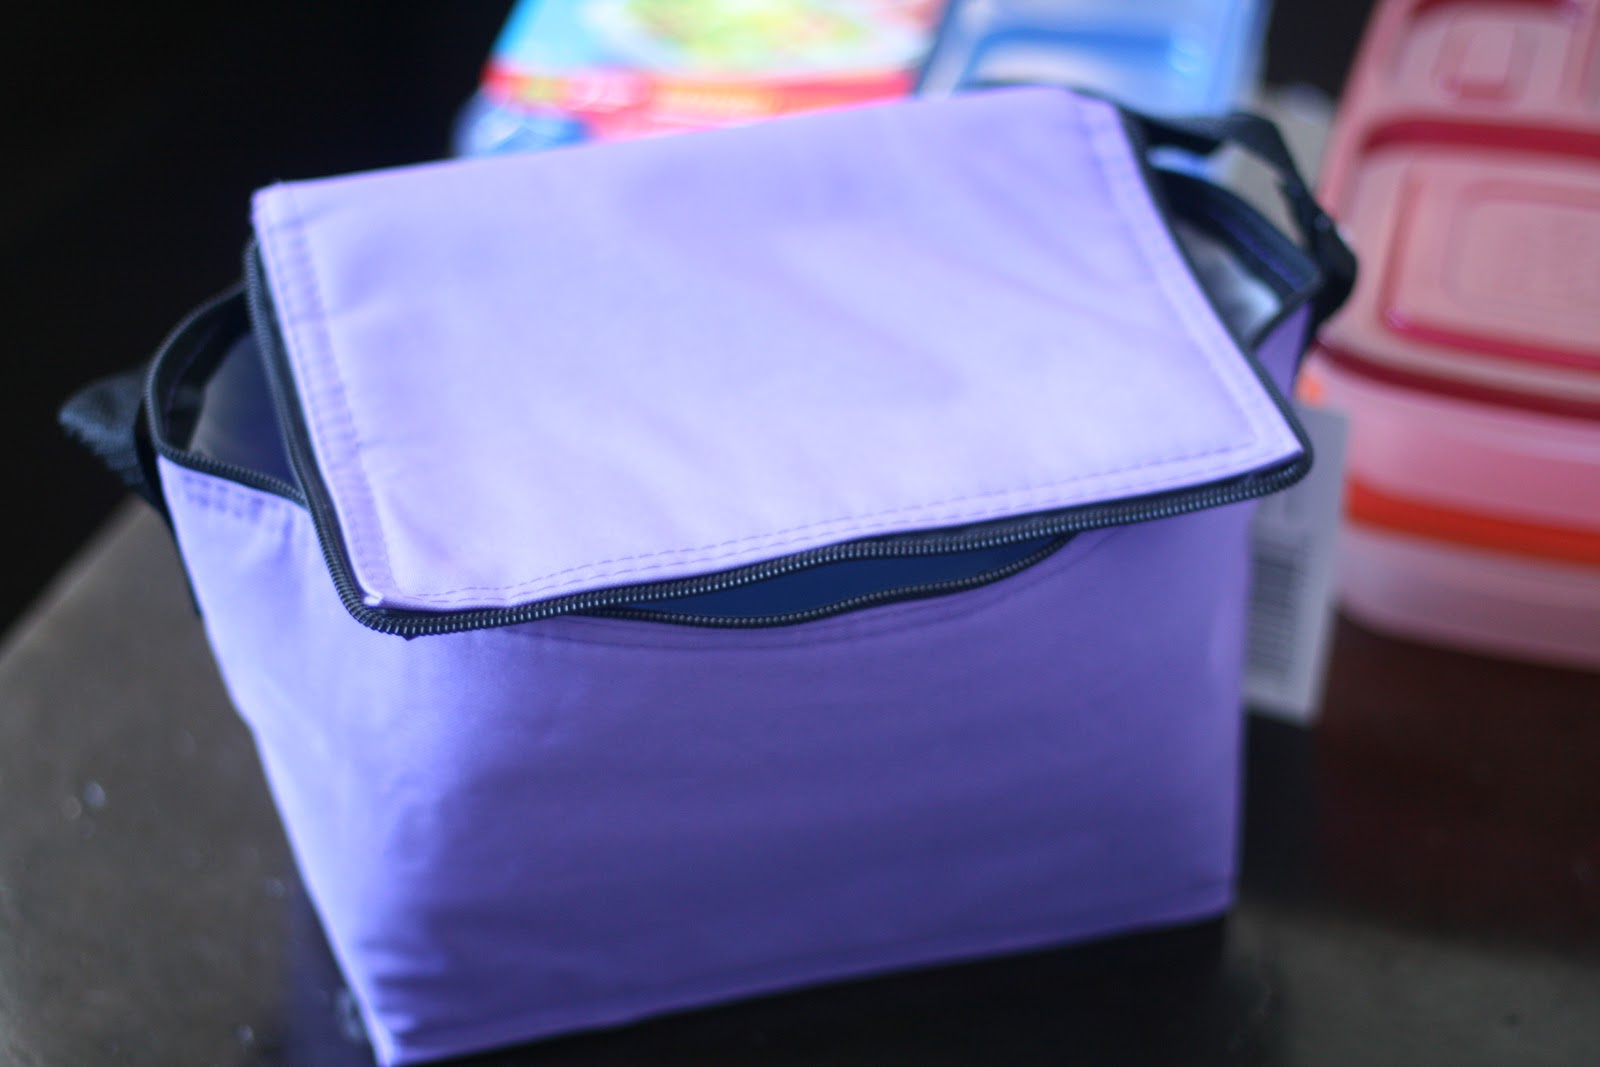 The Best Lunch Box  Reviews, Ratings, Comparisons